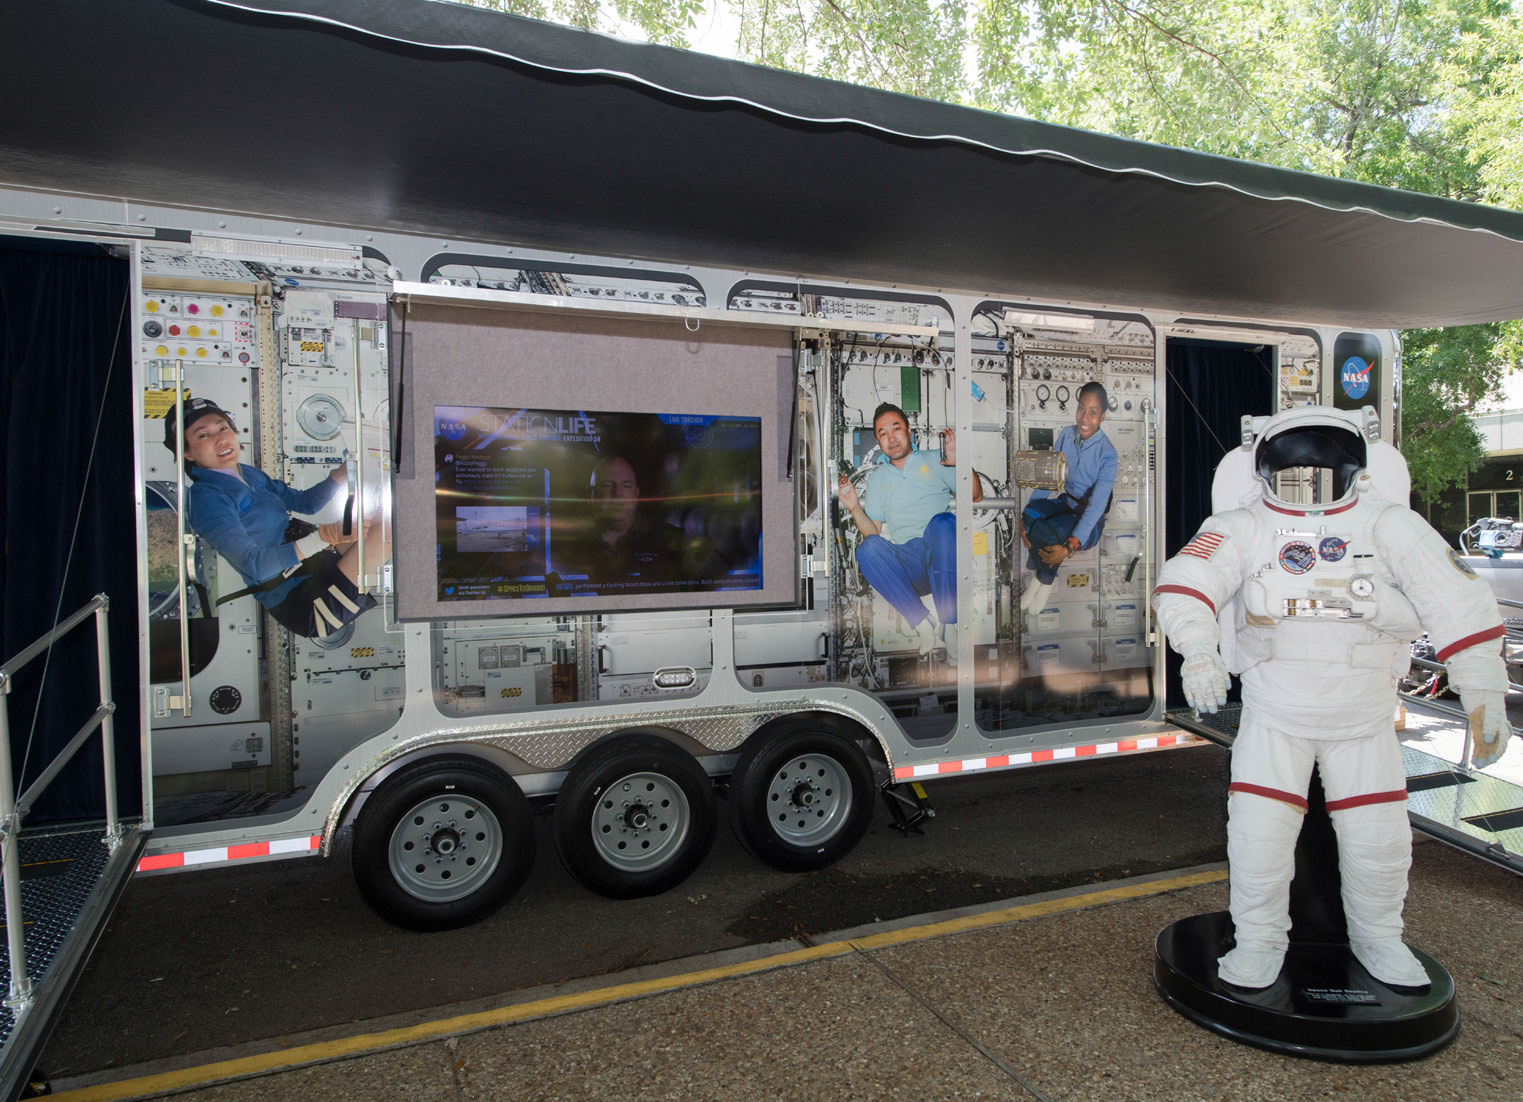 NASA mobile vehicle with an astronaut suit up front.